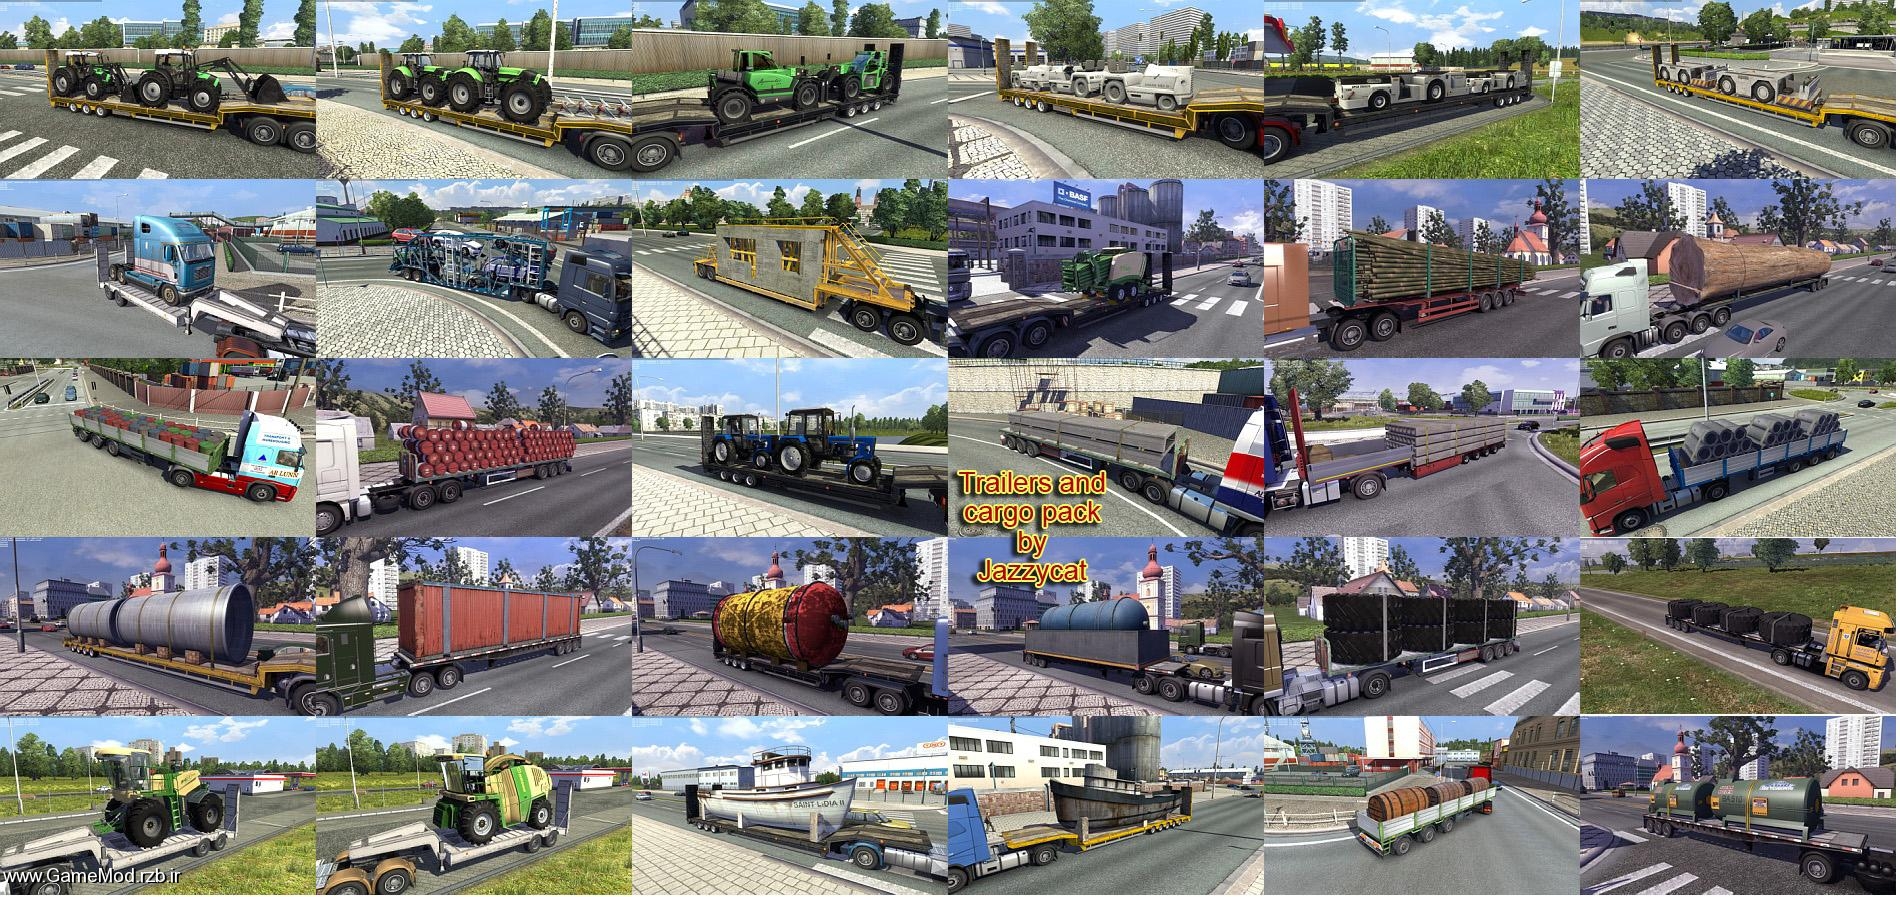 trailers-and-cargo-pack-by-jazzycat-v2-6_1.jpg (1900×897)